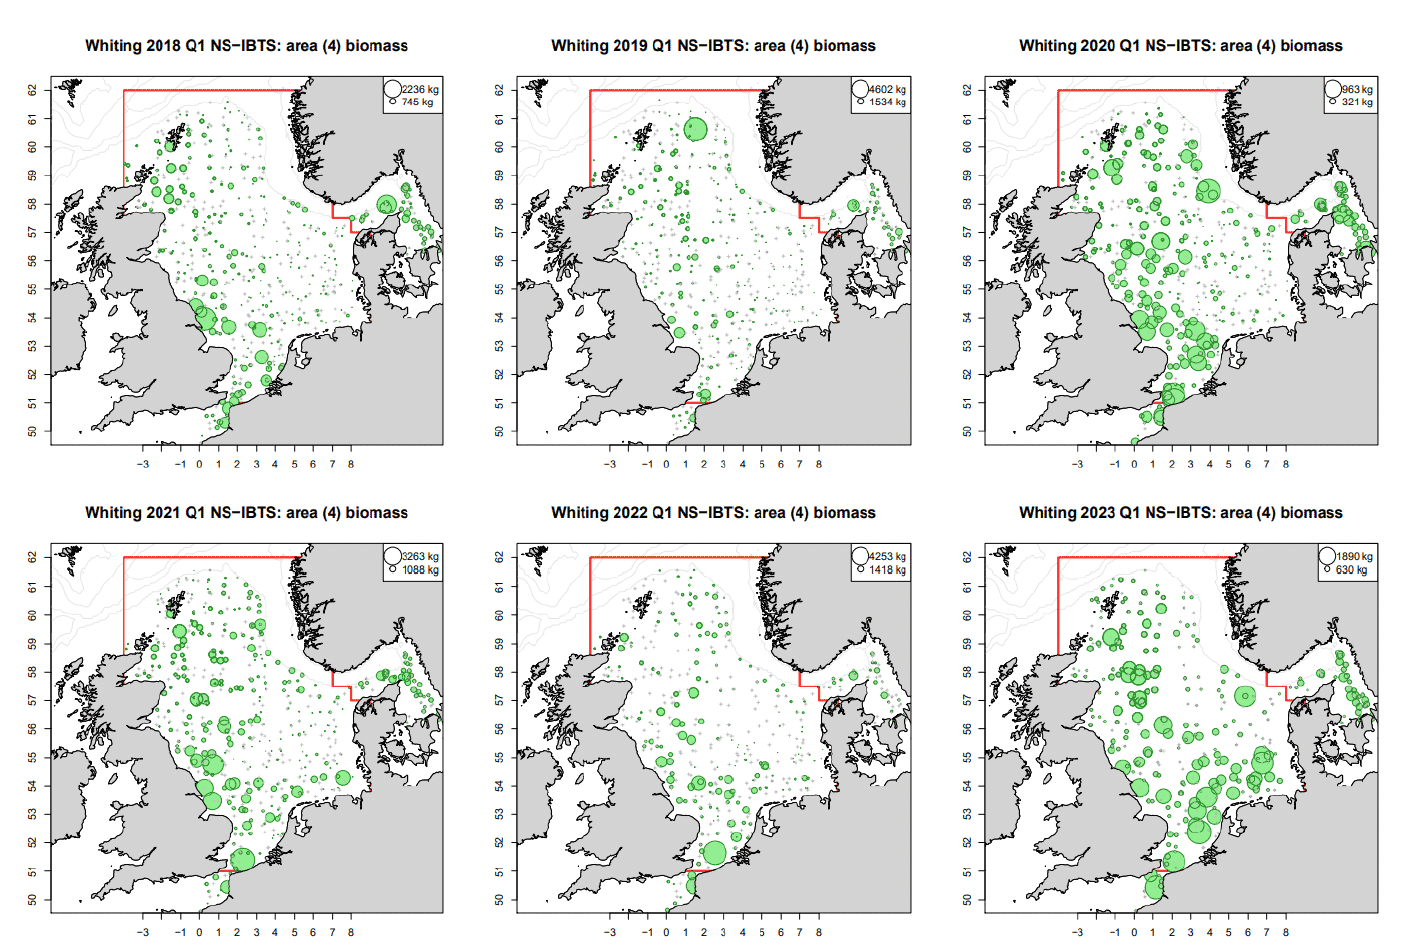 Distribution map for survey whiting biomass in Quarter 1 in the North Sea (area 4). There are 6 bubble plots one per year (2018-2023). The plots indicate larger biomass bubbles occur throughout the North Sea.